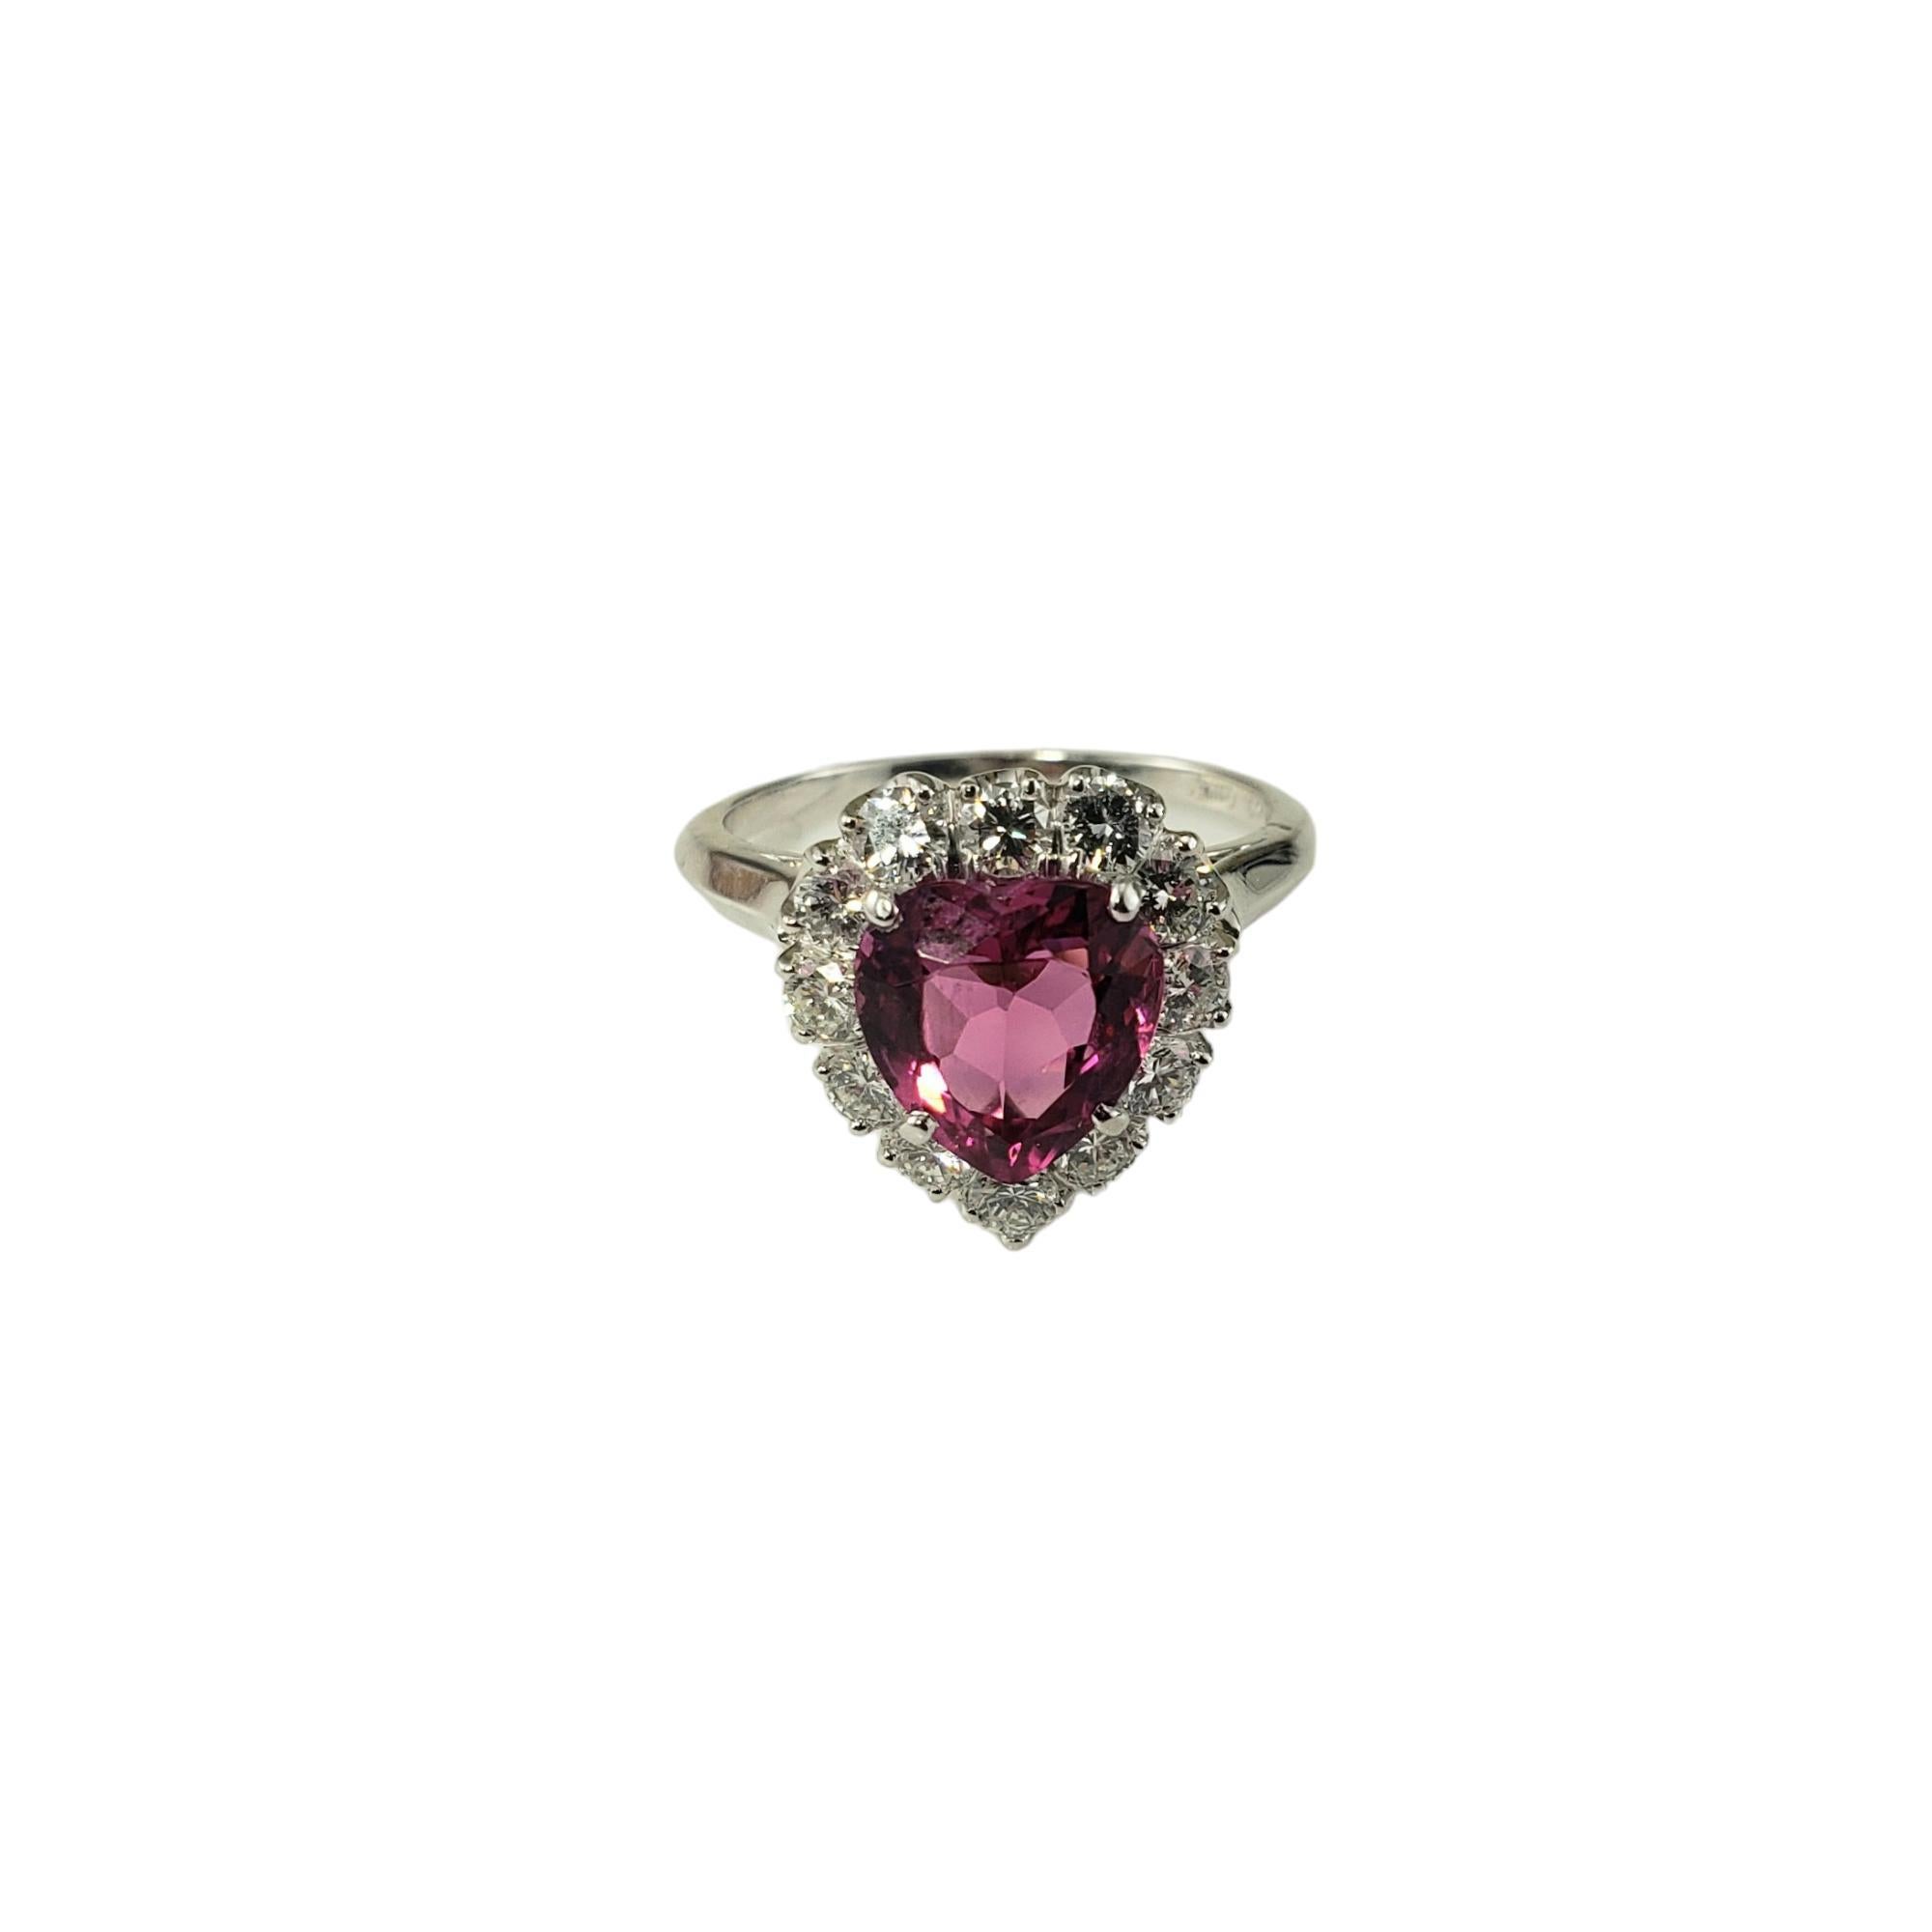 Platinum Pink Tourmaline and Diamond Ring Size 5.75 JAGi Certified-

This stunning ring features one hearth shaped natural pink tourmaline (8.5 mm x 8.0 mm) surrounded by 12 round brilliant cut diamonds set in classic platinum.

Tourmaline weight: 